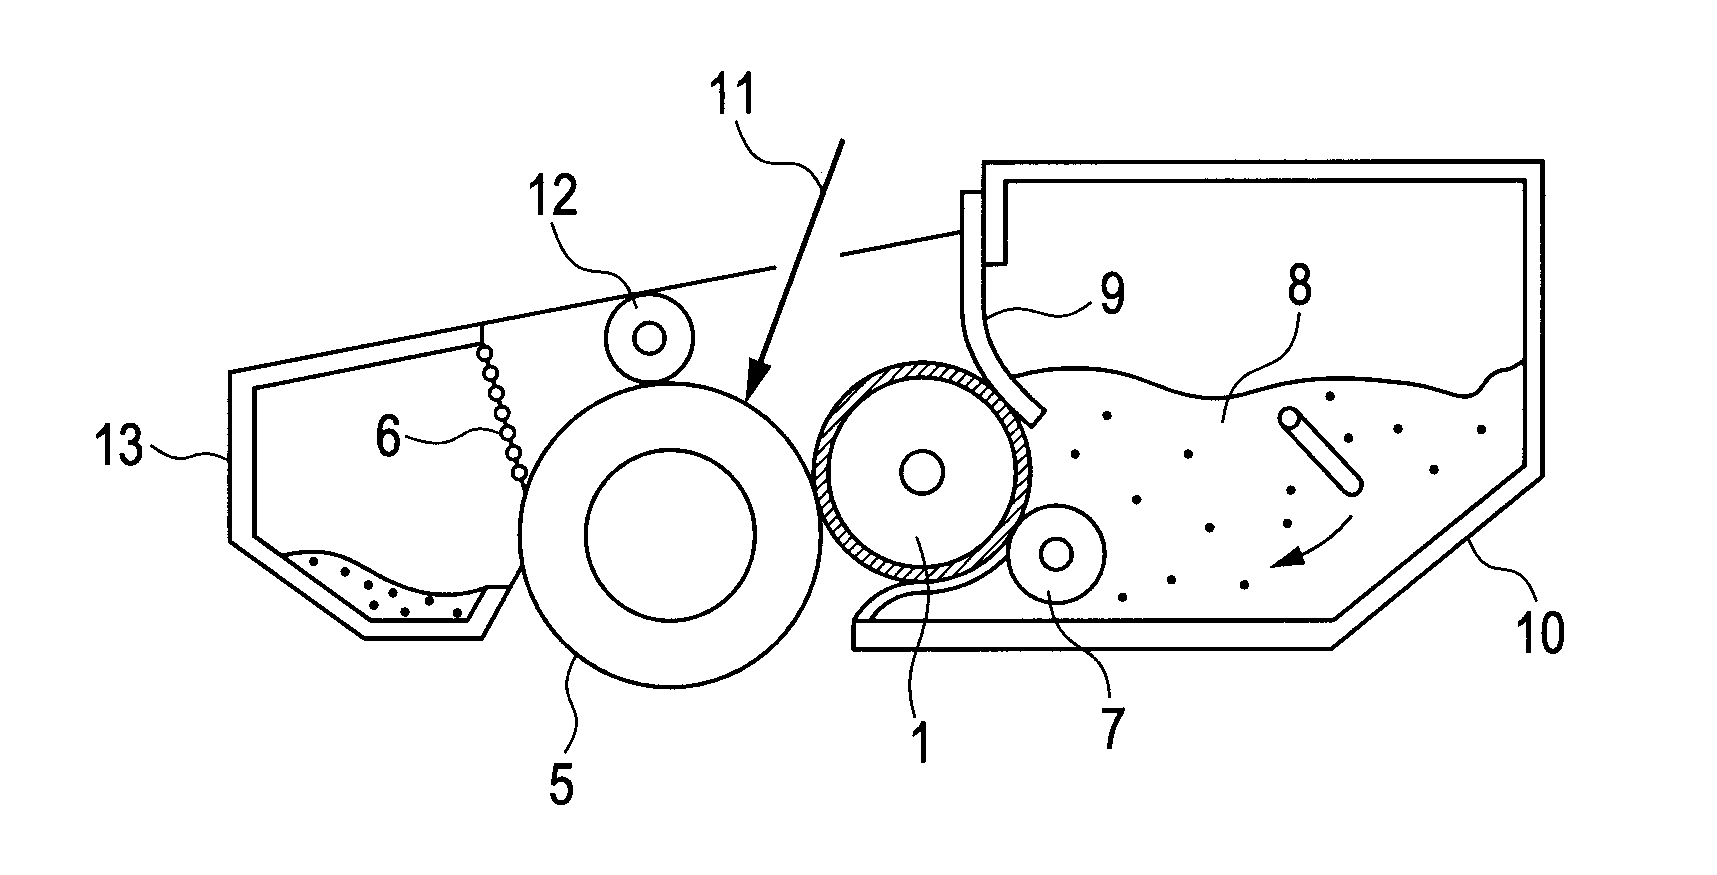 Developer support member, electrophotographic process cartridge and electrophotographic image forming apparatus